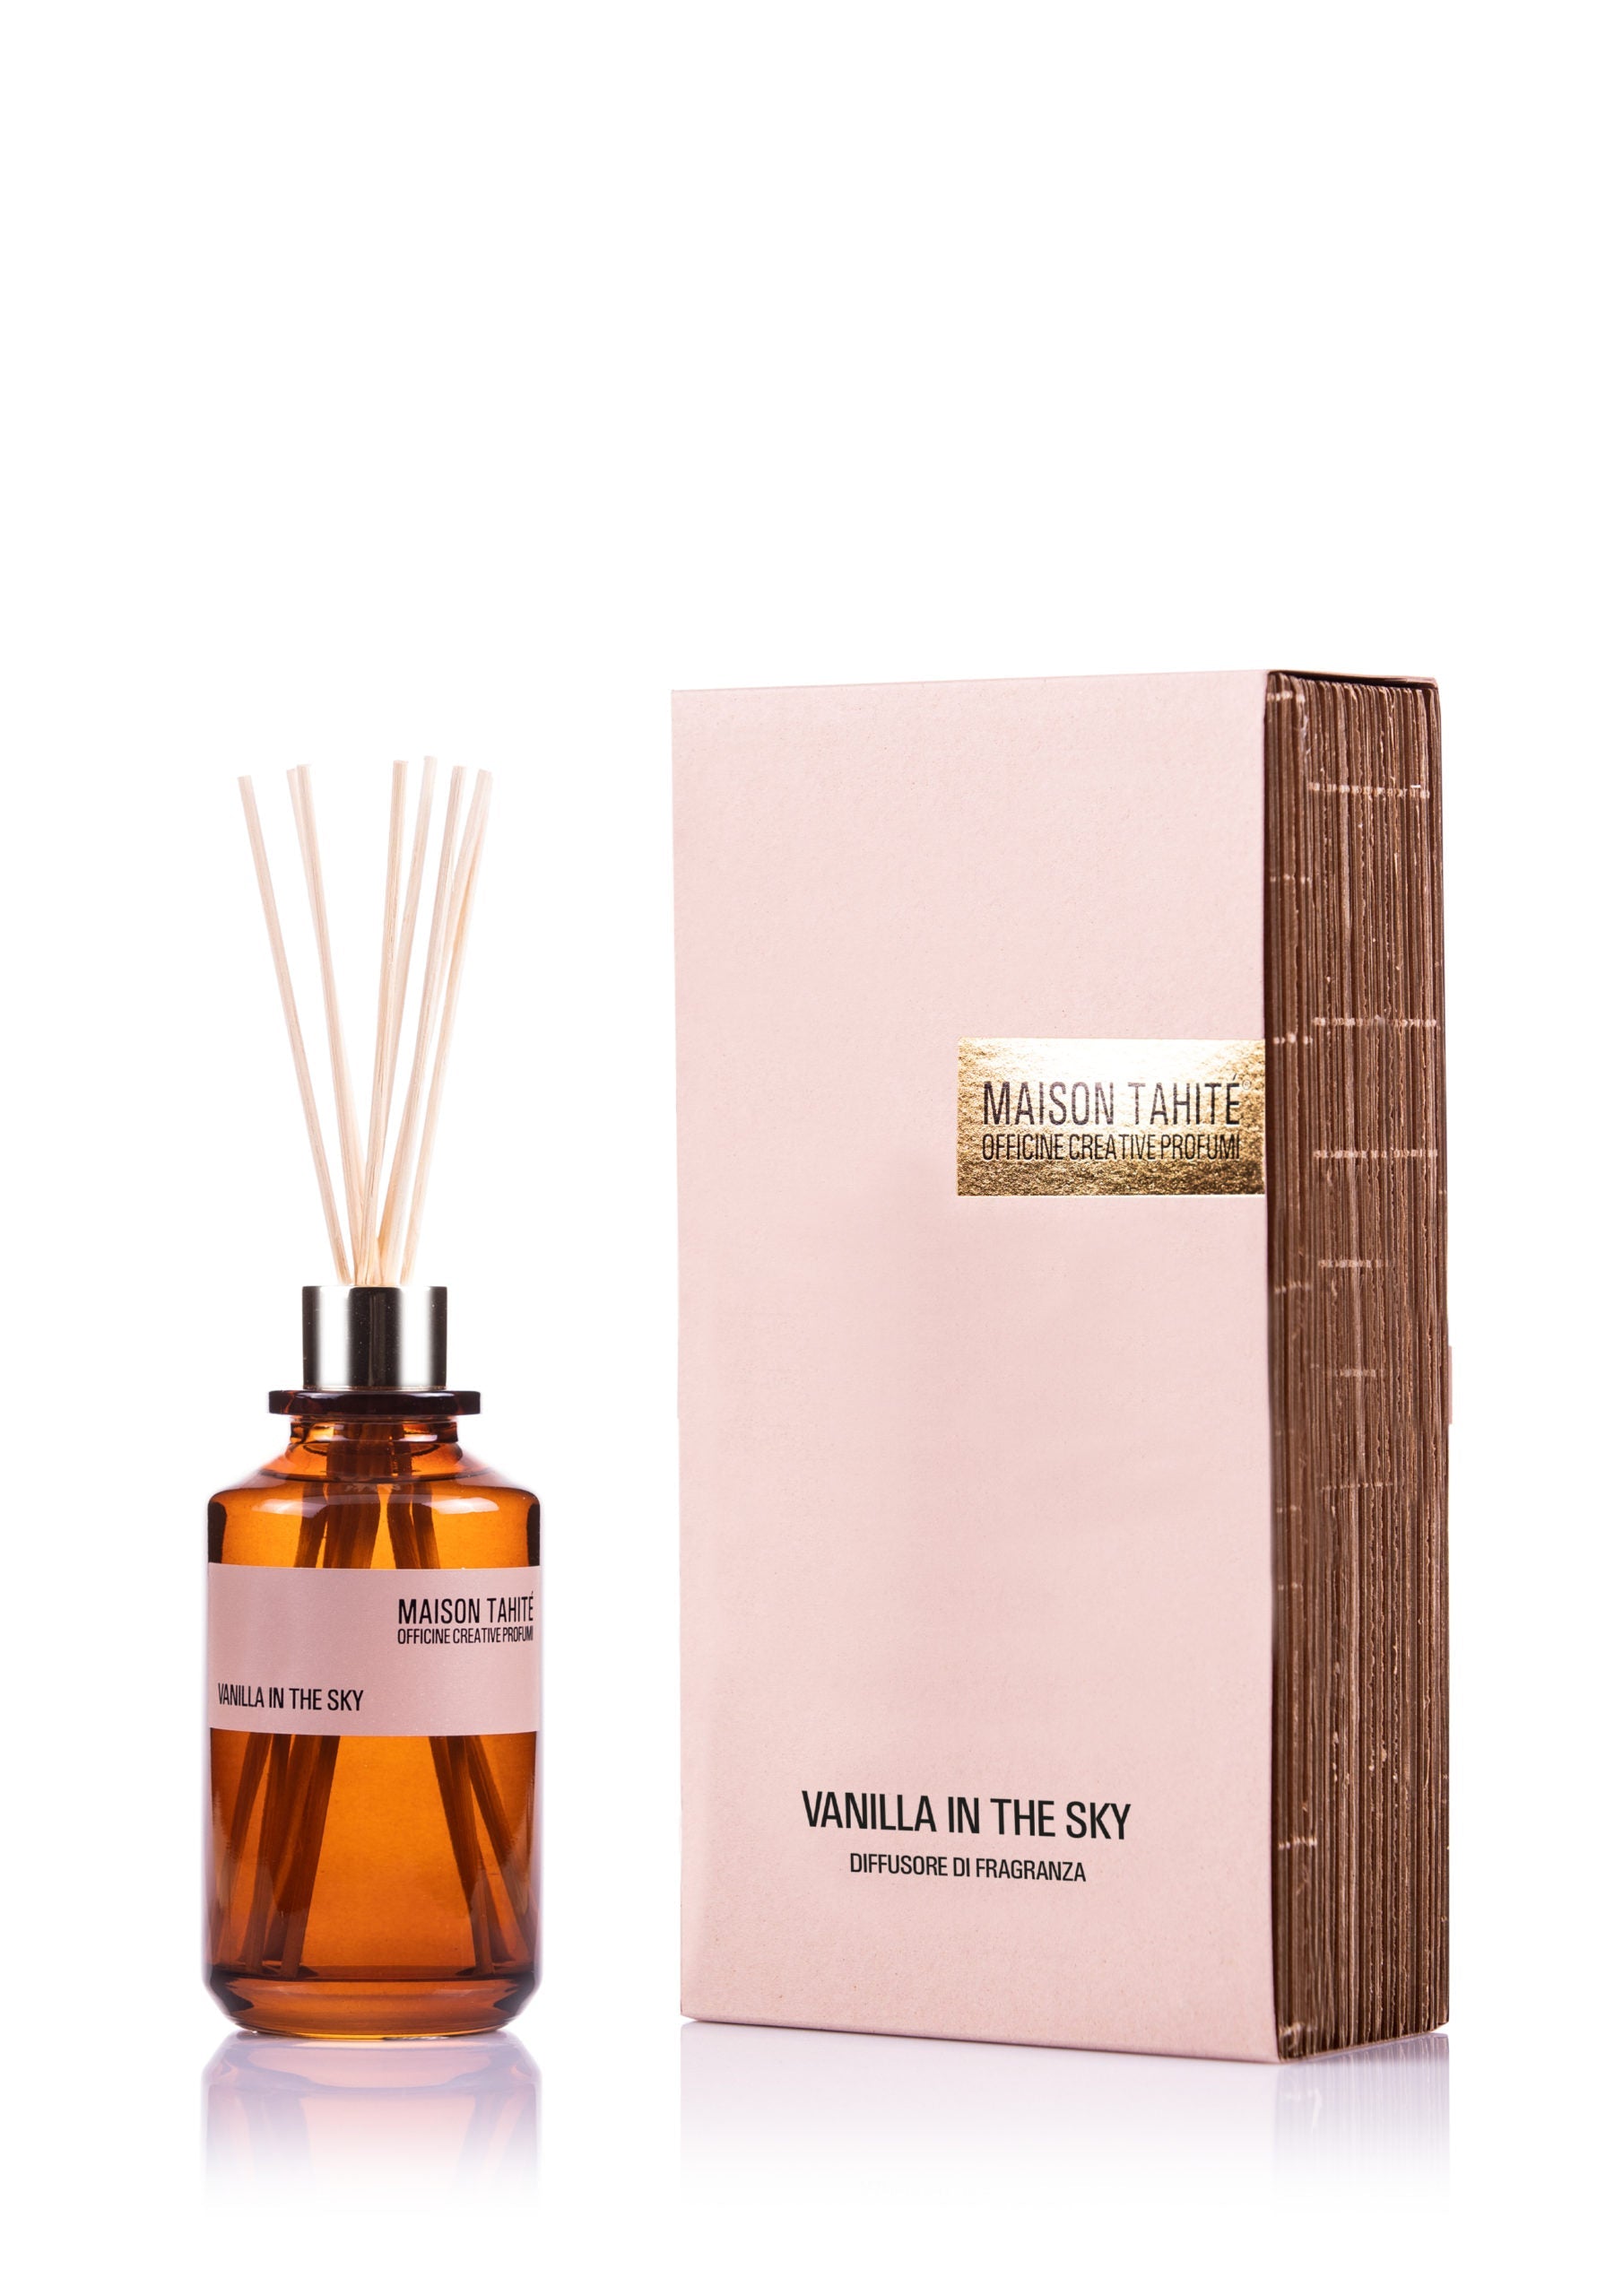 Maison Tahité Vanilla in the Sky Fragrance Diffuser